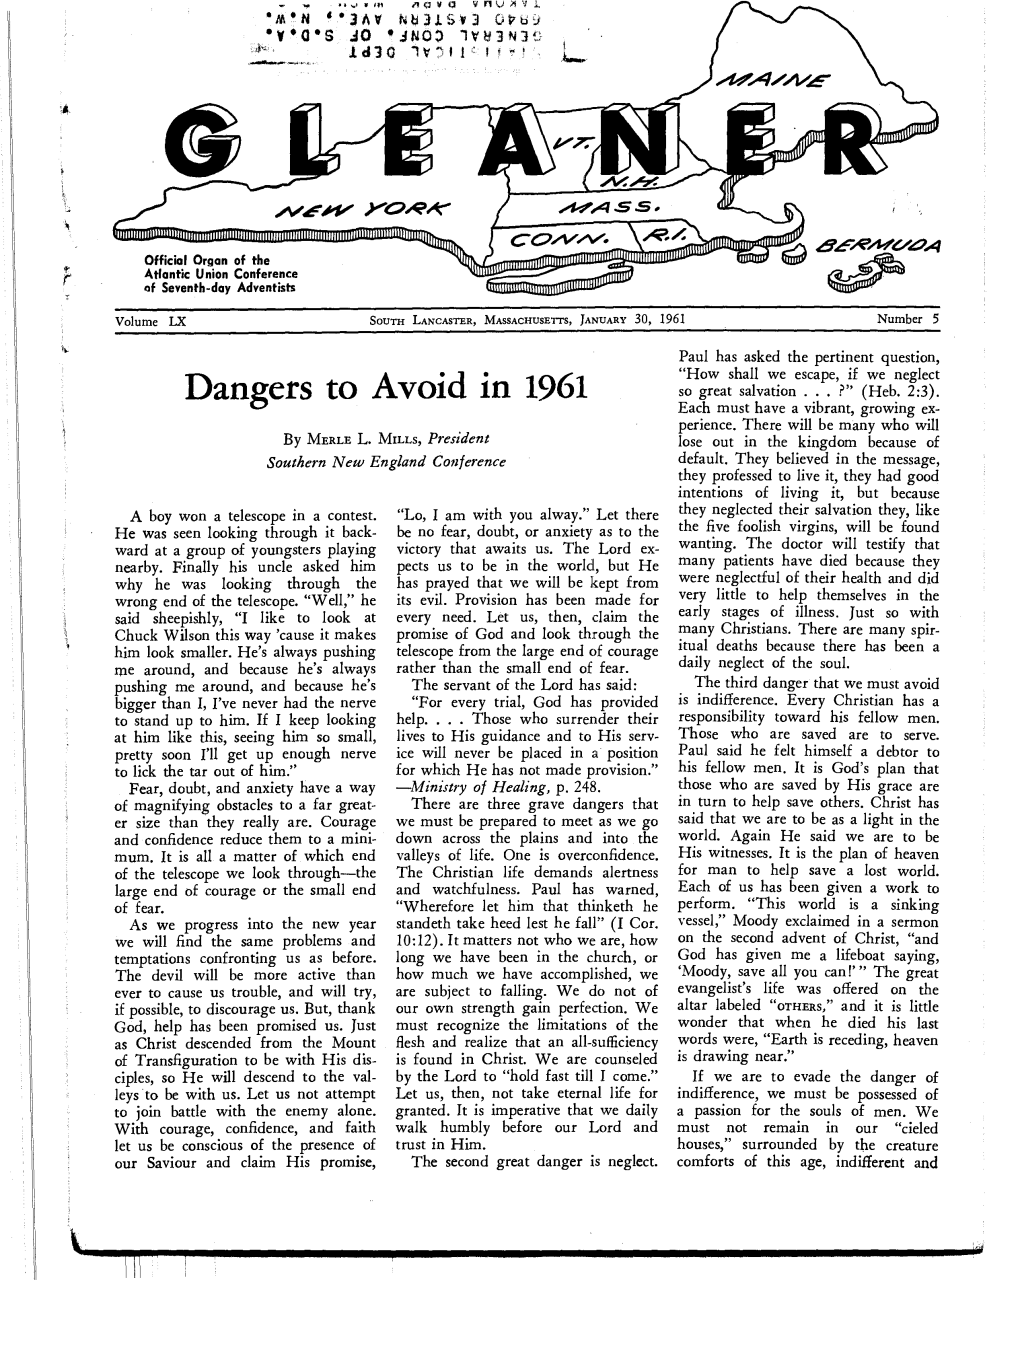 Dangers to Avoid in 1961 So Great Salvation